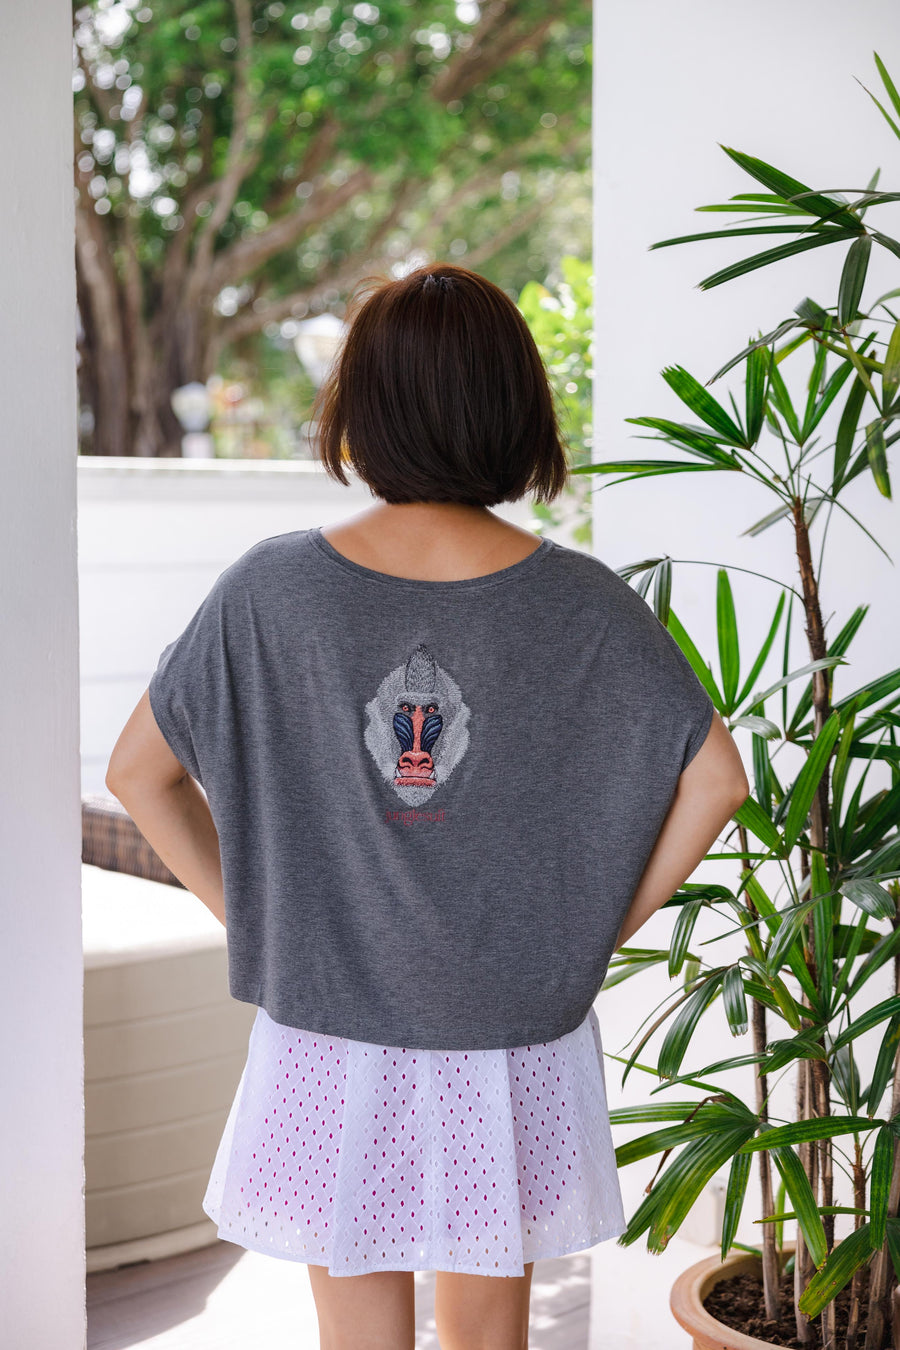 Rearview mandrill tee